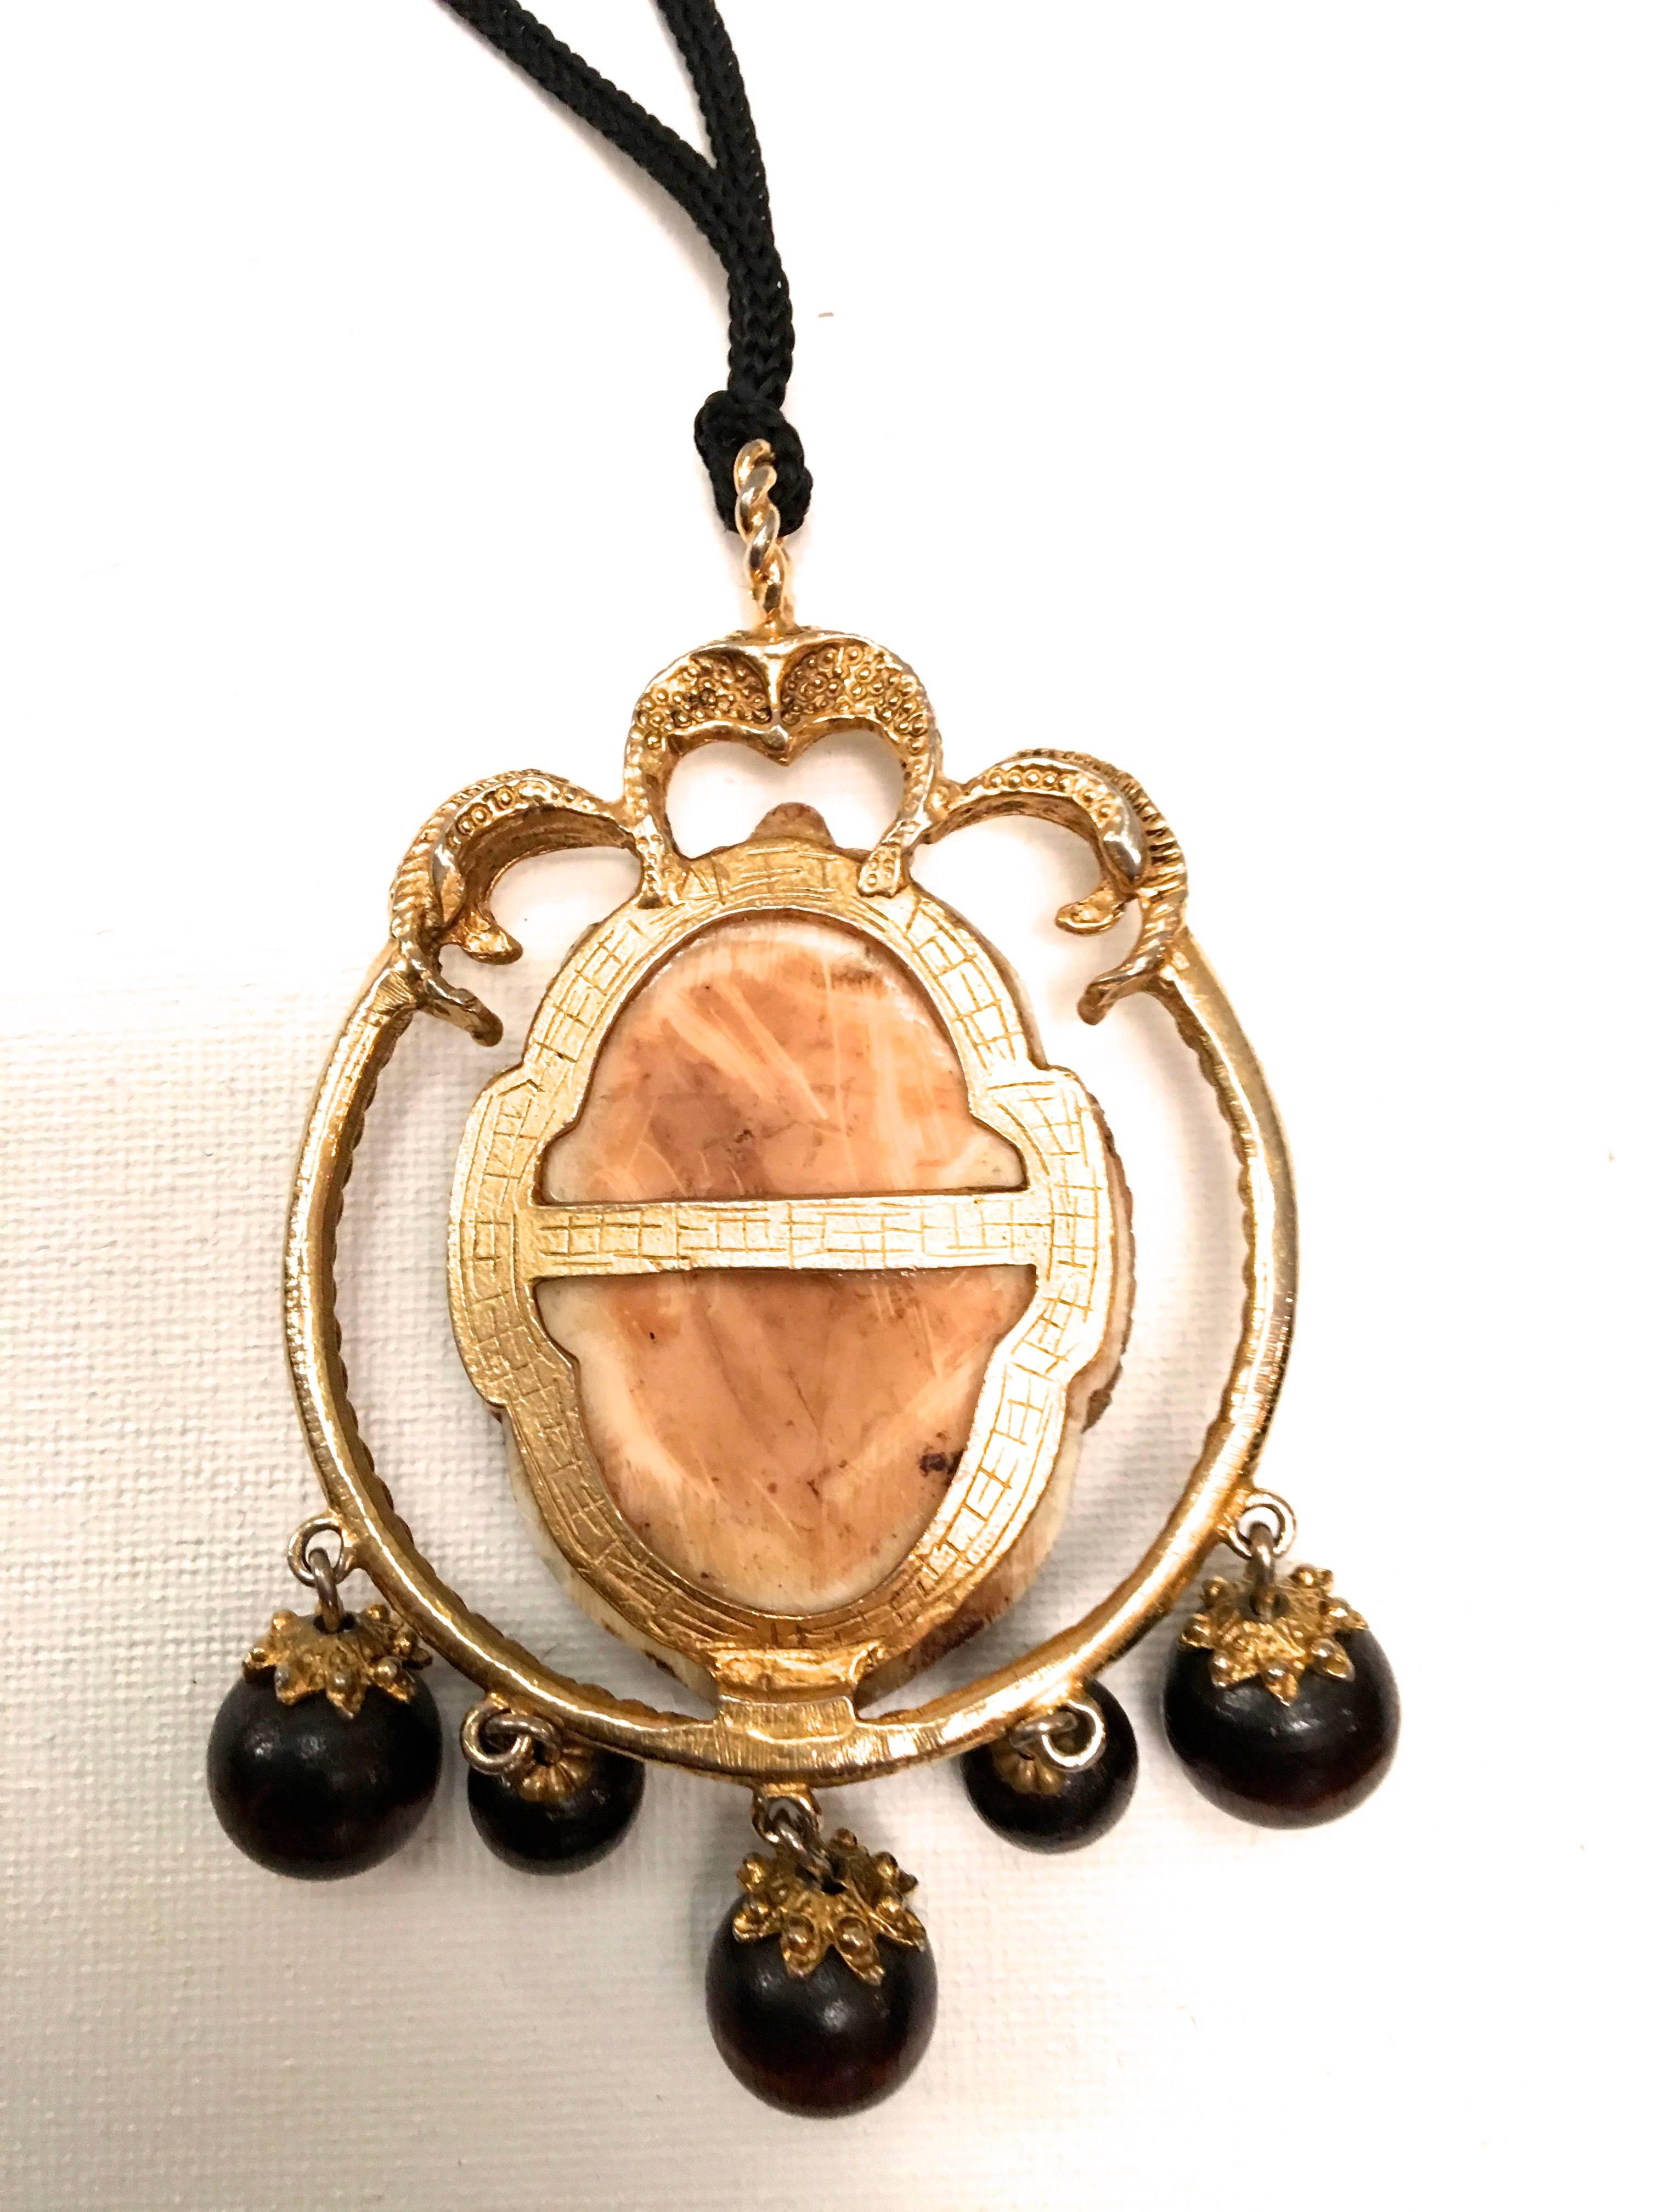 Presented here is a rare necklace from Selro. The necklace is comprised of a pendant of an Asian warrior with a beard. The pendant of the Asian warrior is encased by a gold tone metal frame. There are small decorative beads that dangle from the